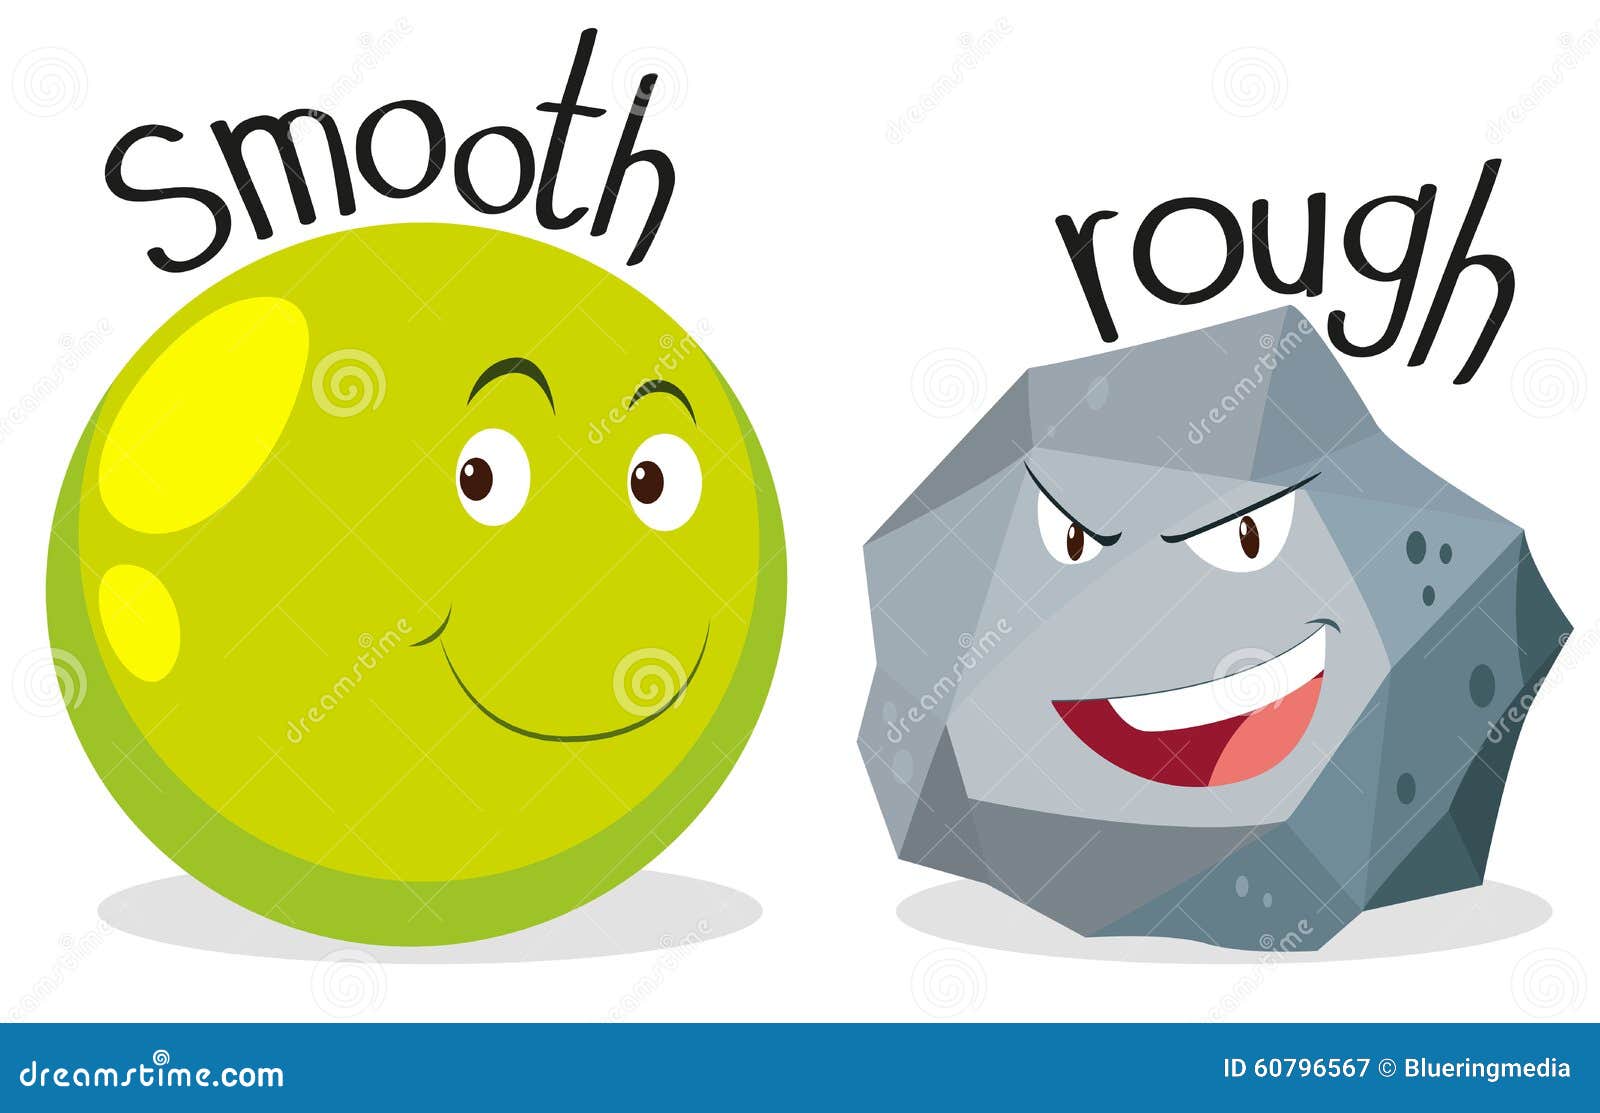 rough objects clipart - photo #12